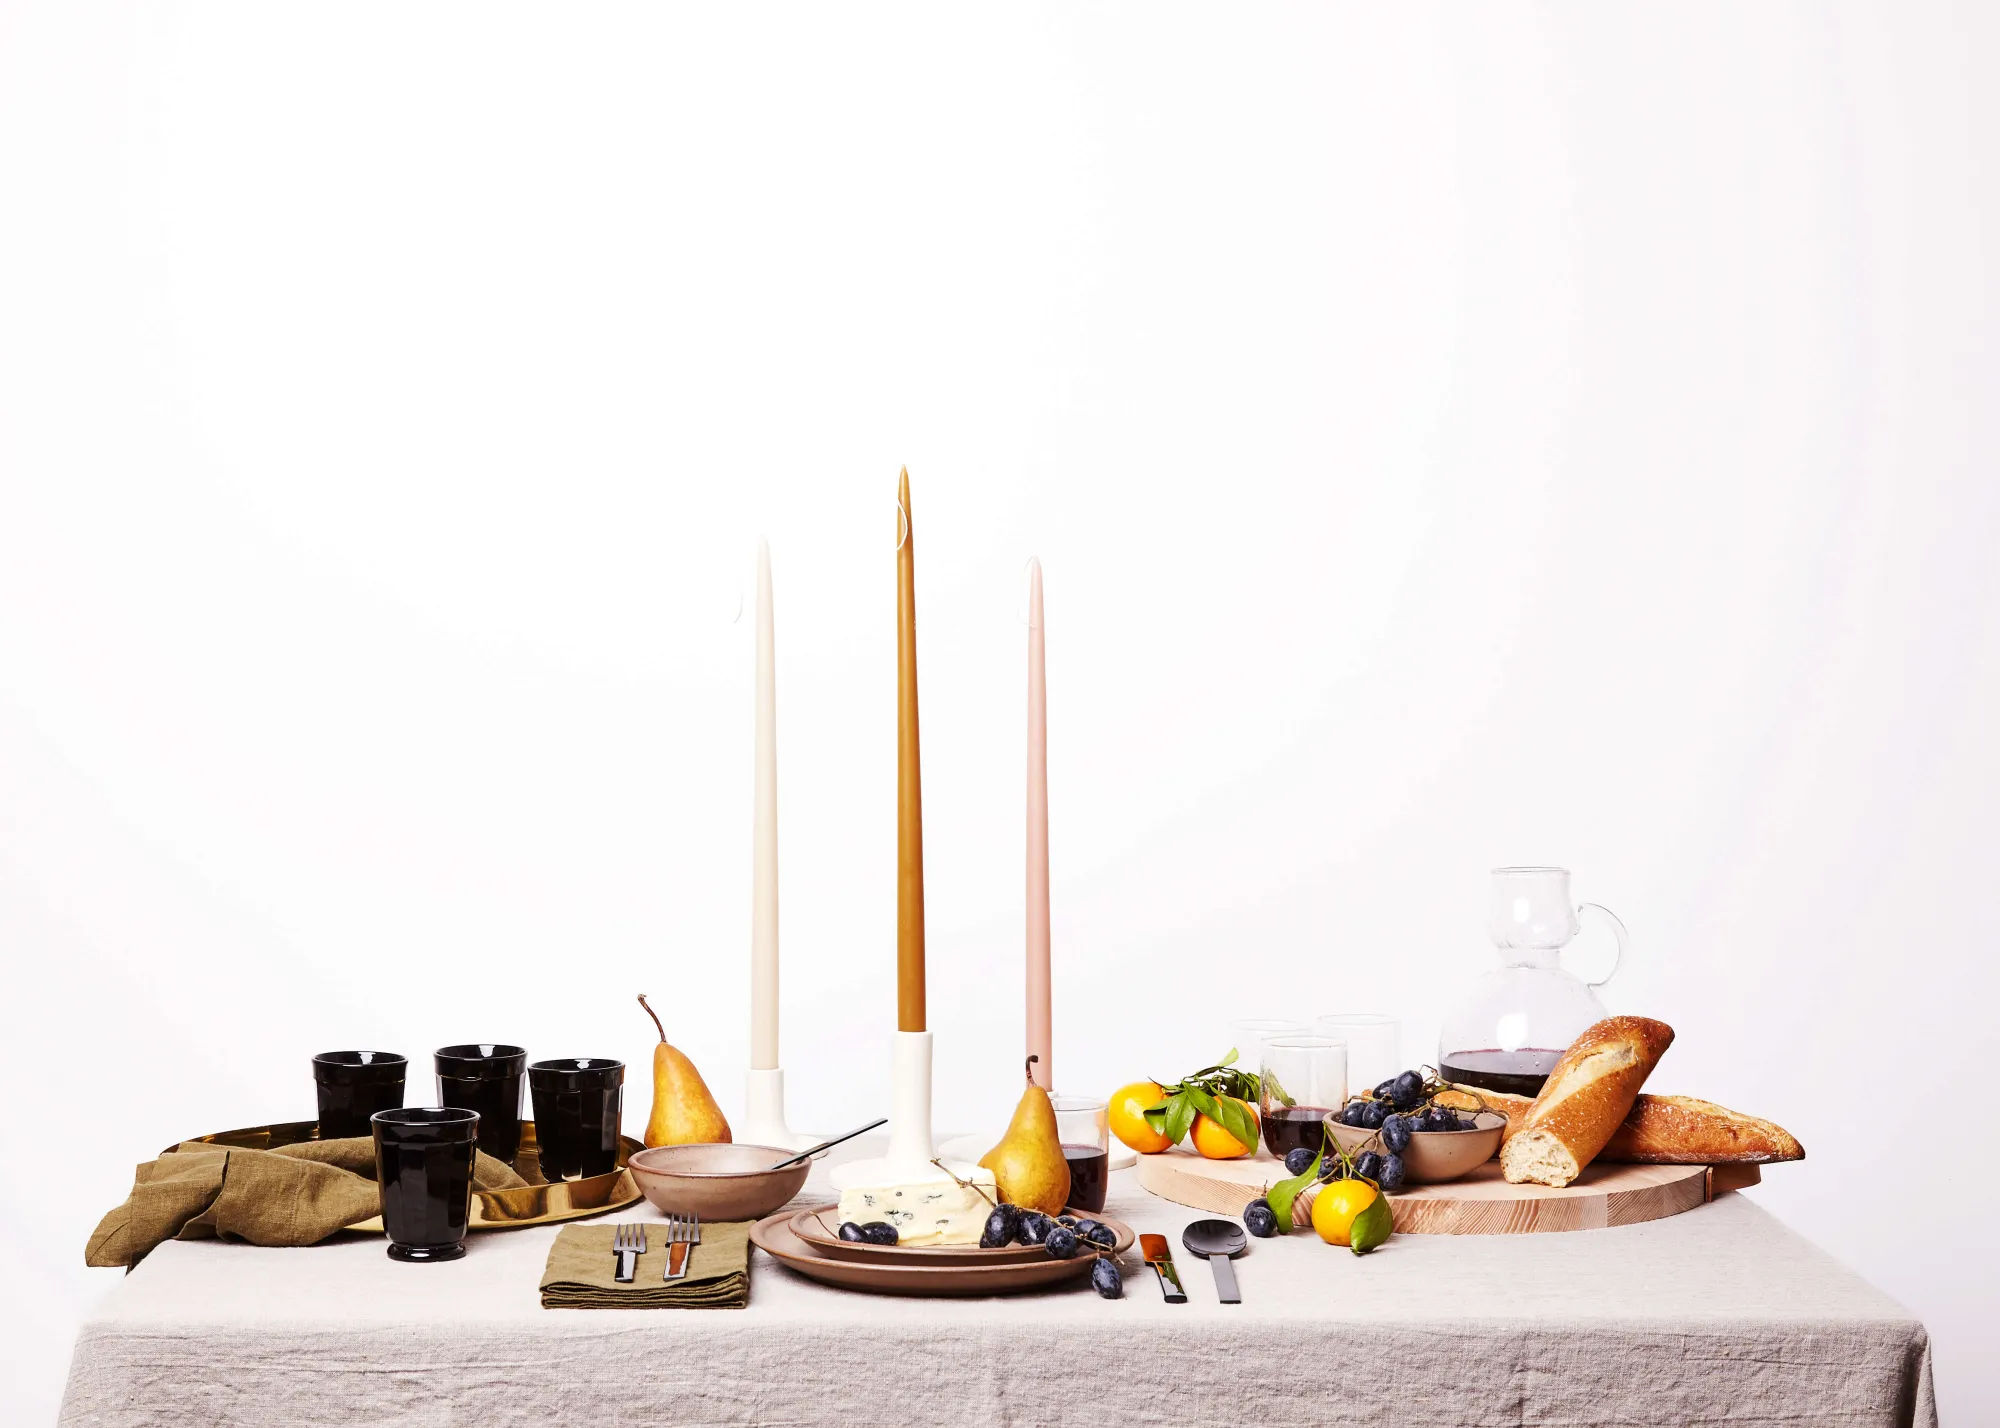 Enter to Win a Holiday Tablescape Curated by the Editors of Remodelista